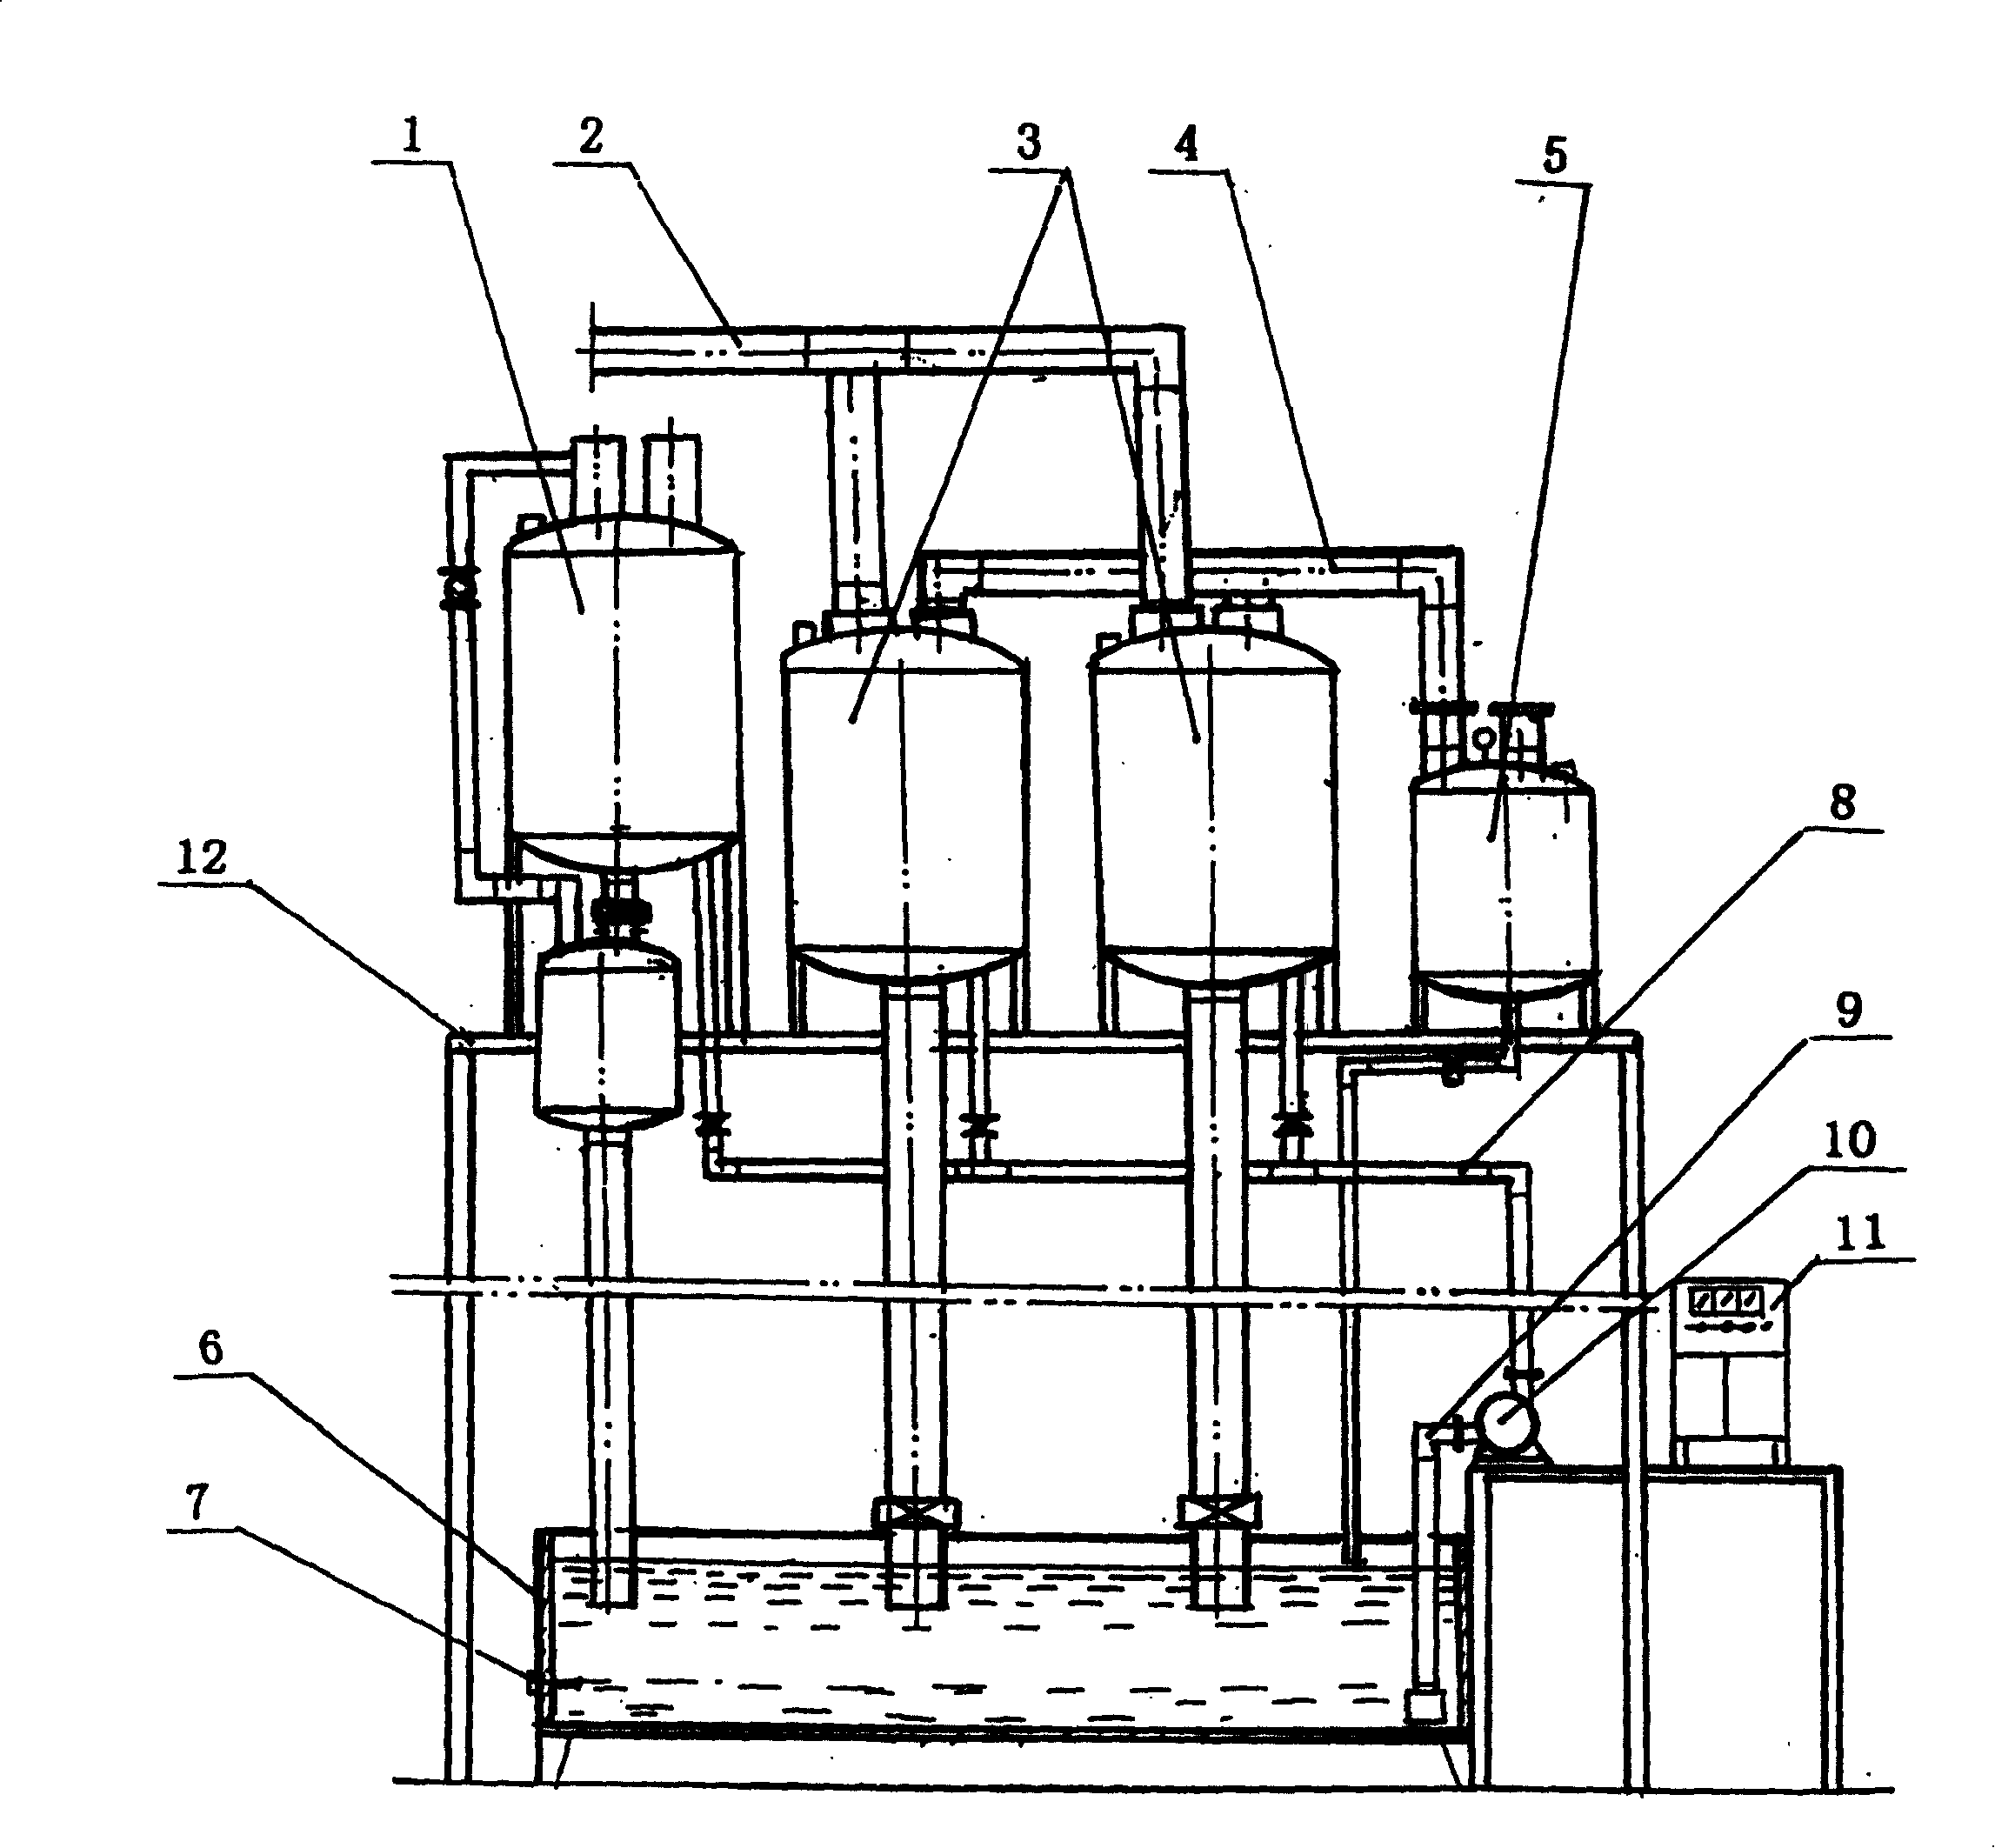 Water plunger type vacuum pump and compressor